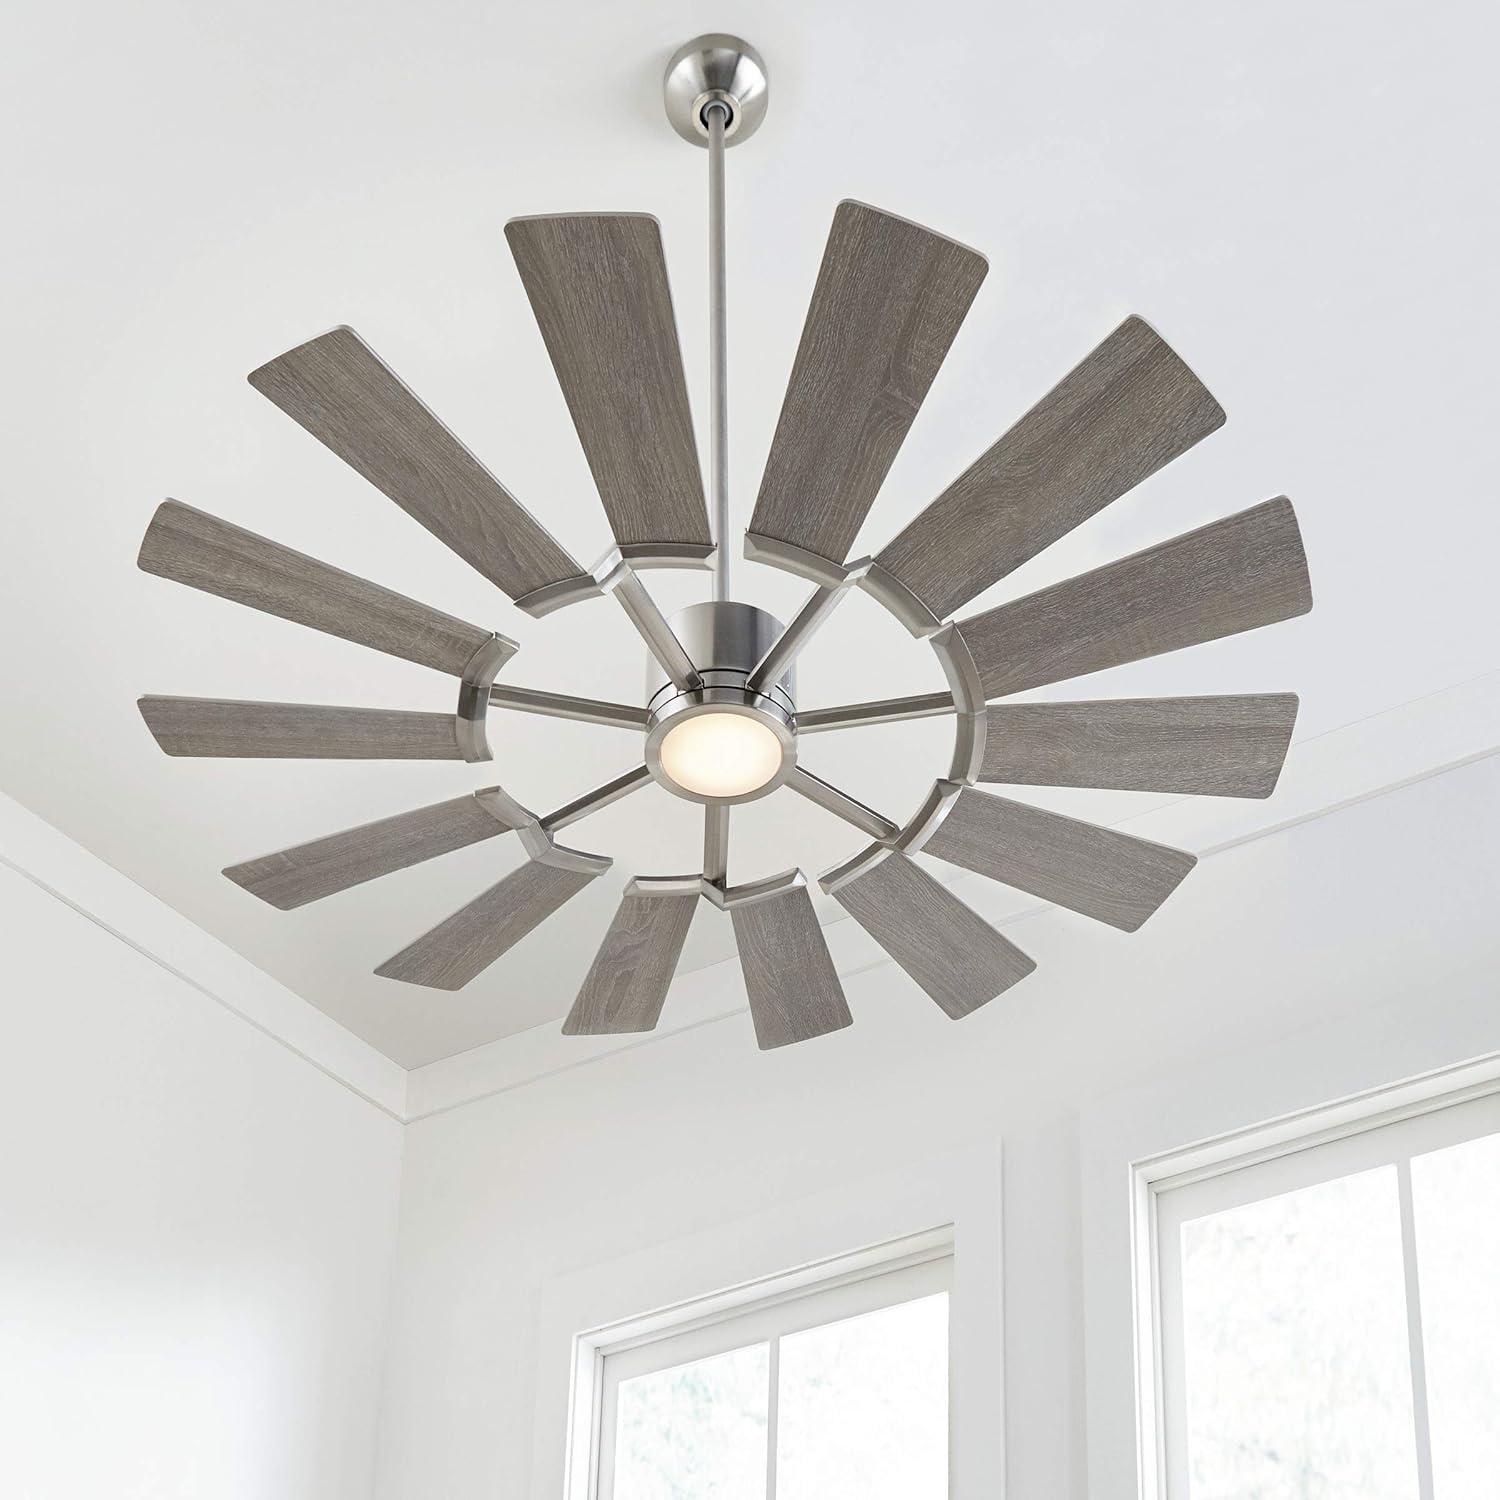 Prairie II 52" Brushed Steel Windmill-Inspired Ceiling Fan with LED Light